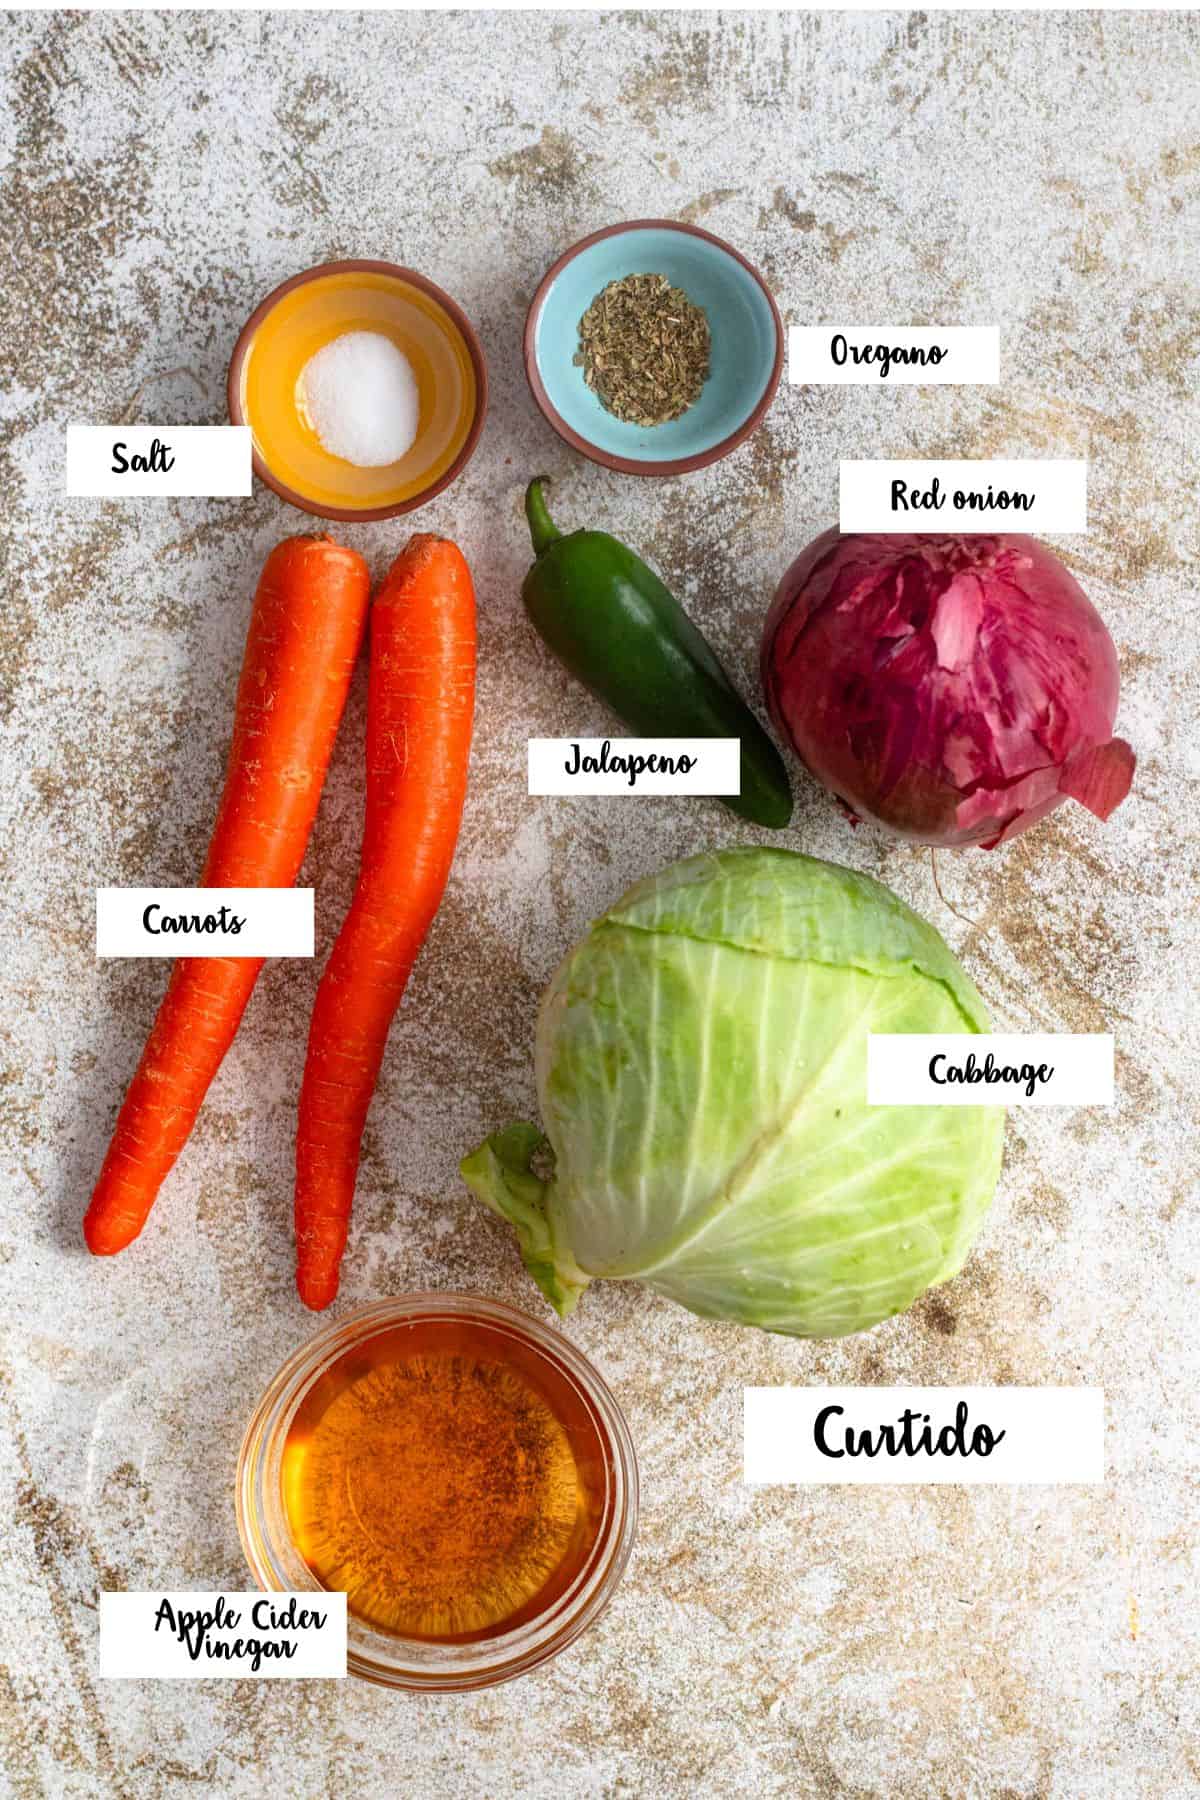 Ingredients shown are used to prepare curtido. 